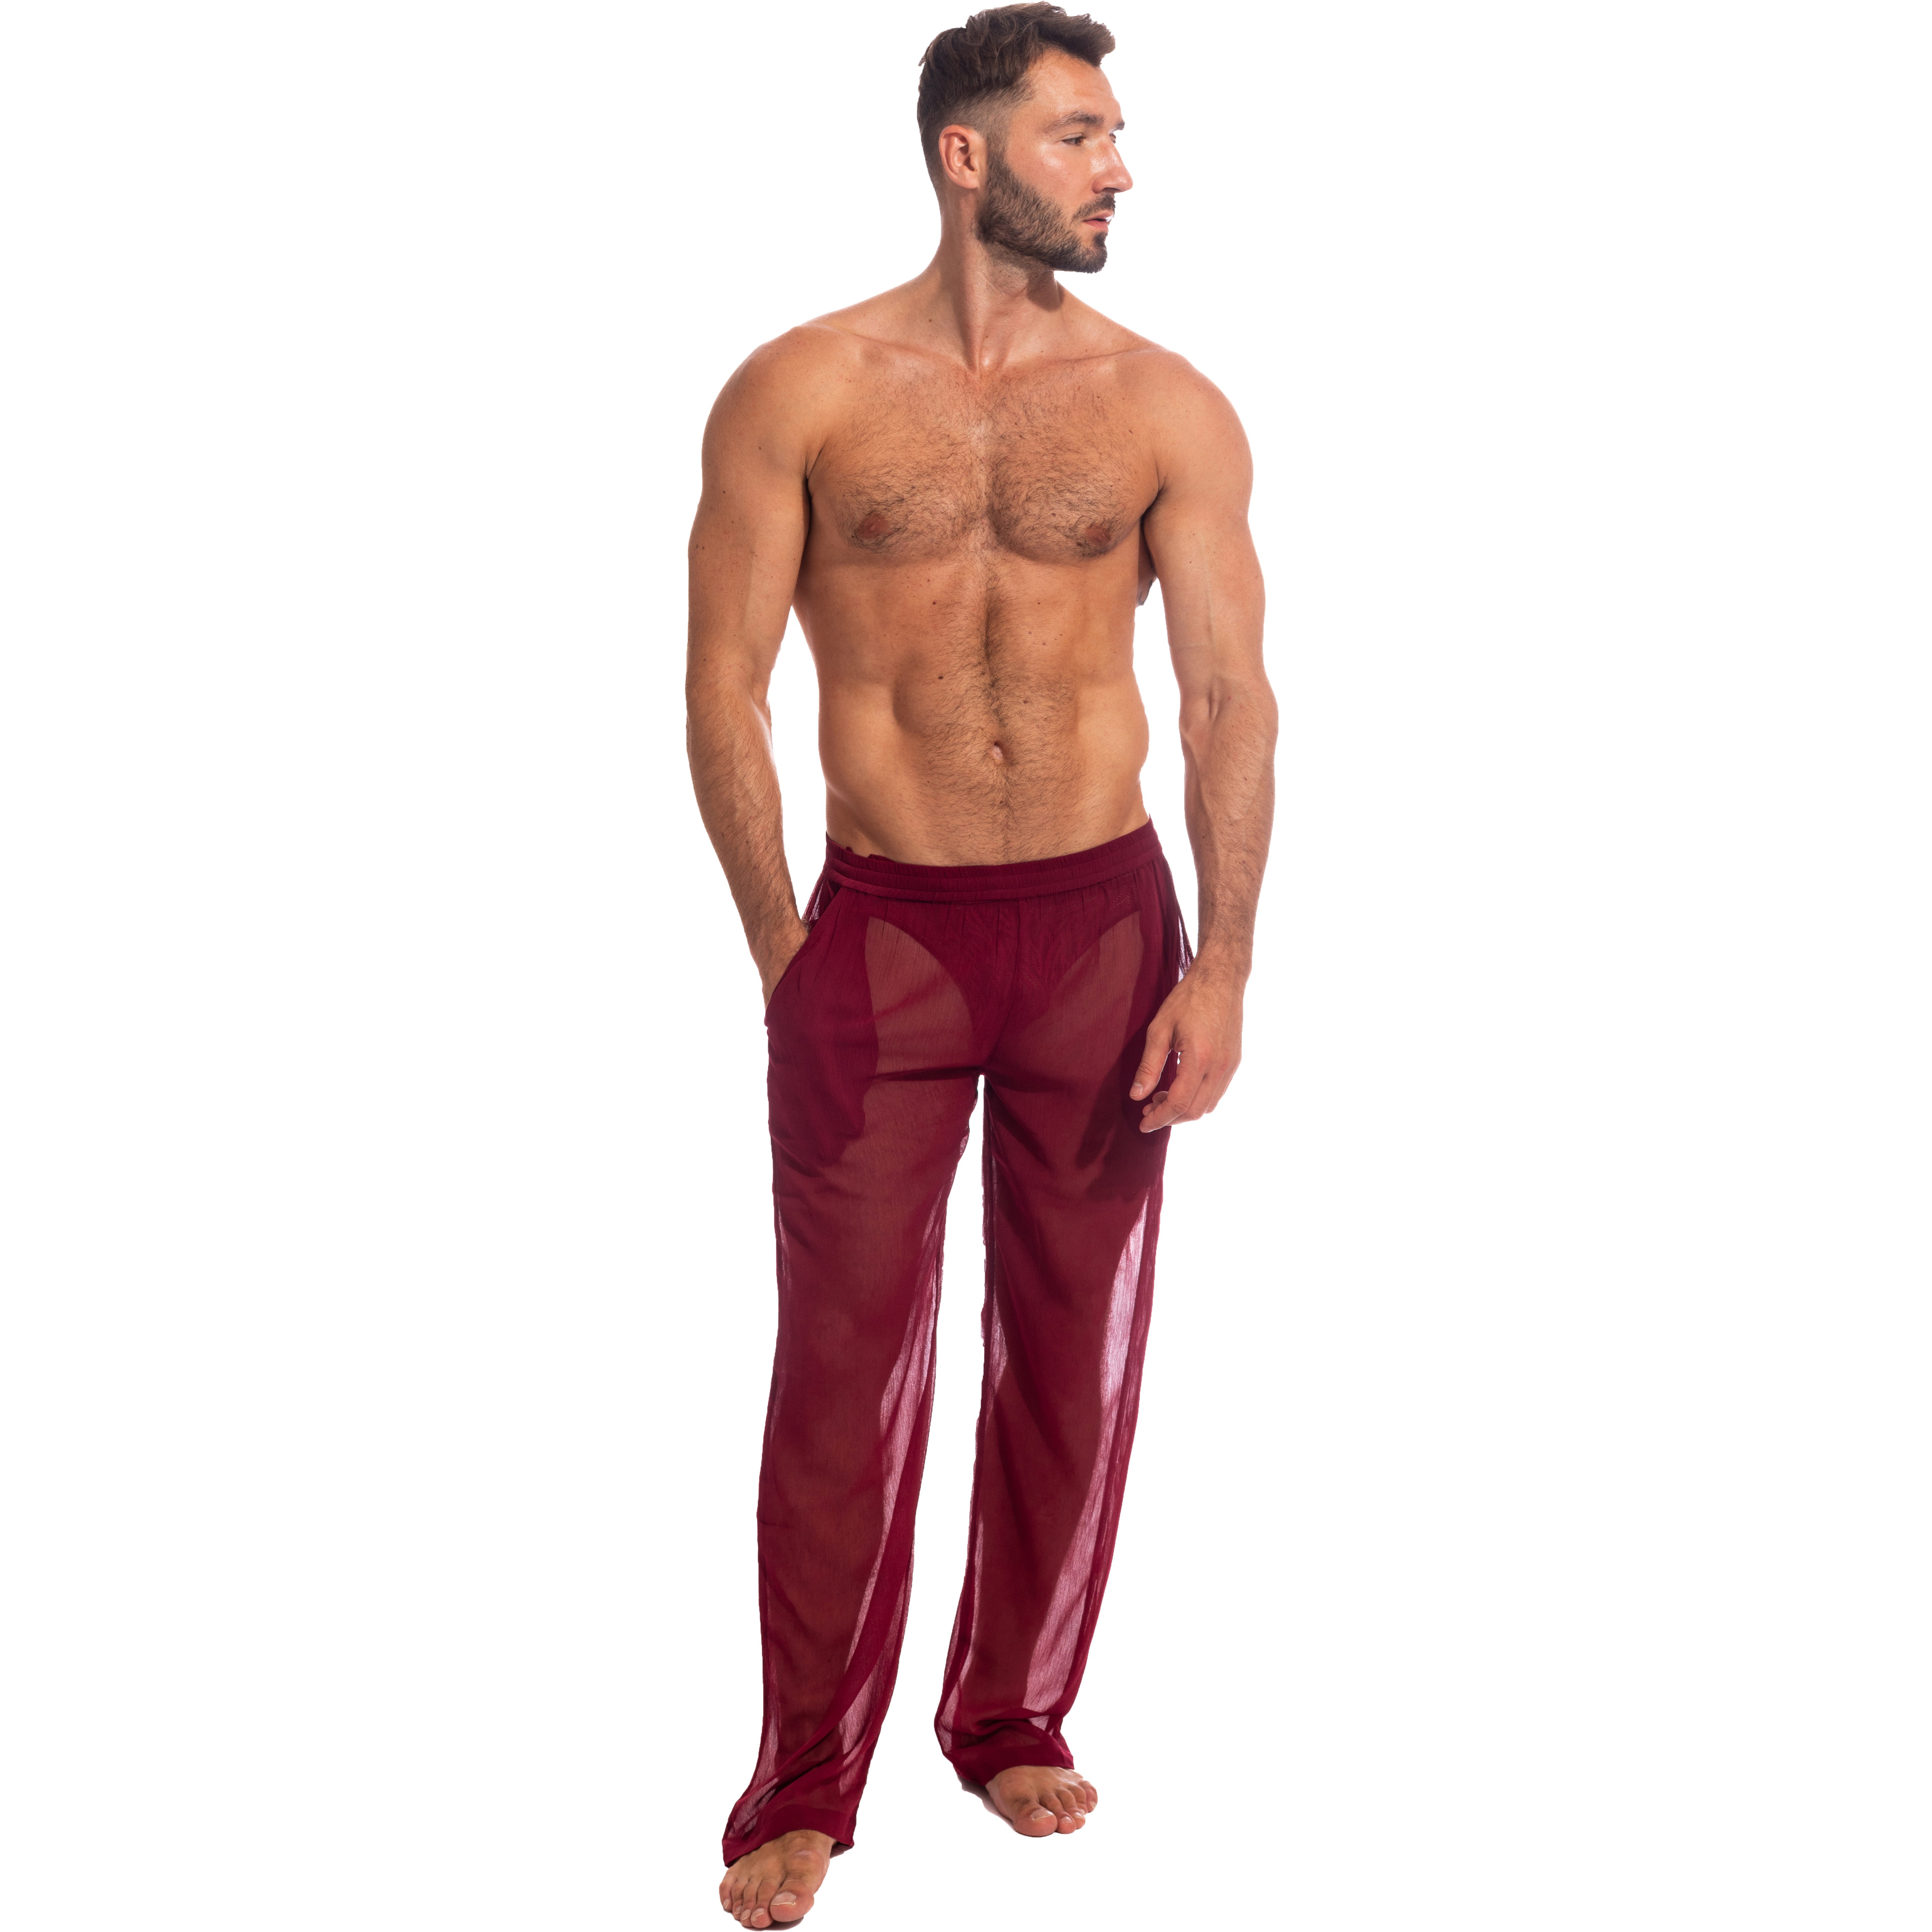 Chantilly - Red transparent trousers: Shorts and indoor pants for m